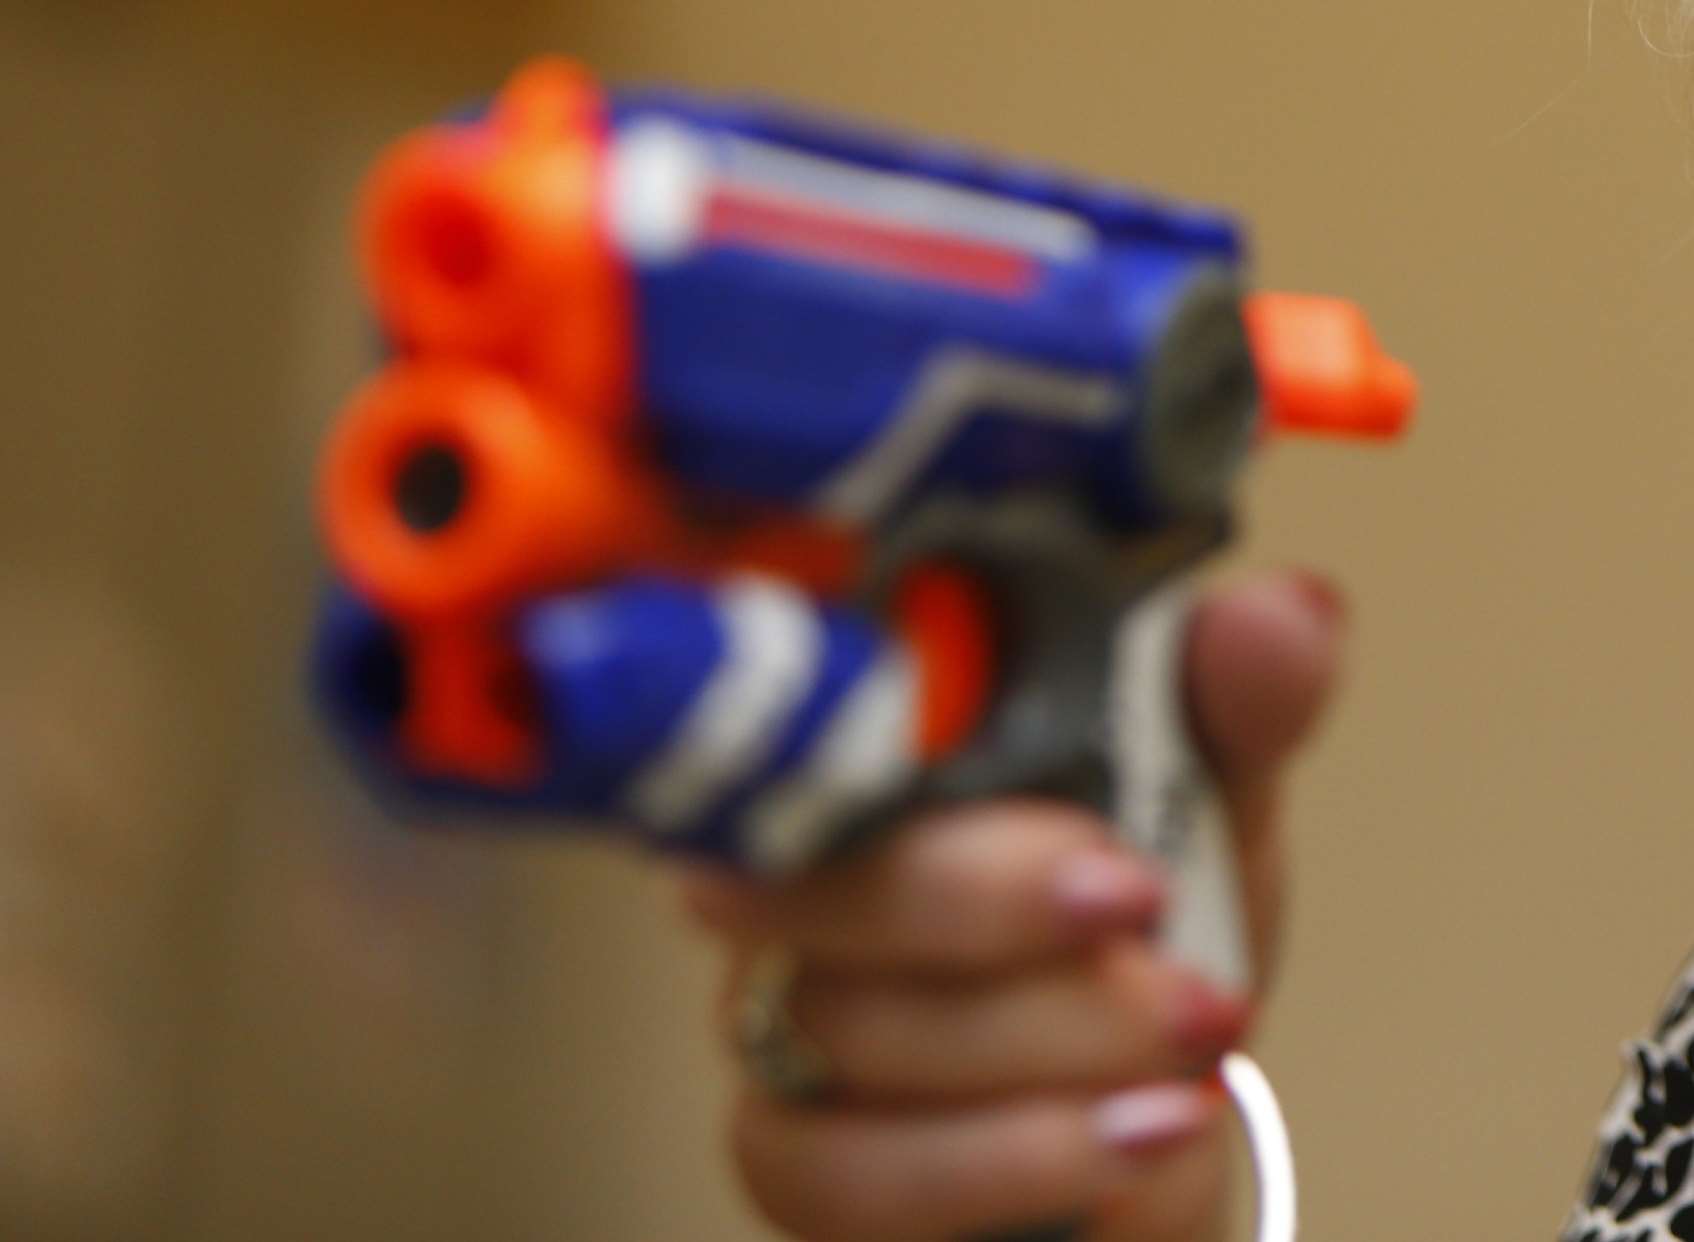 Children are being warned about using Nerf guns